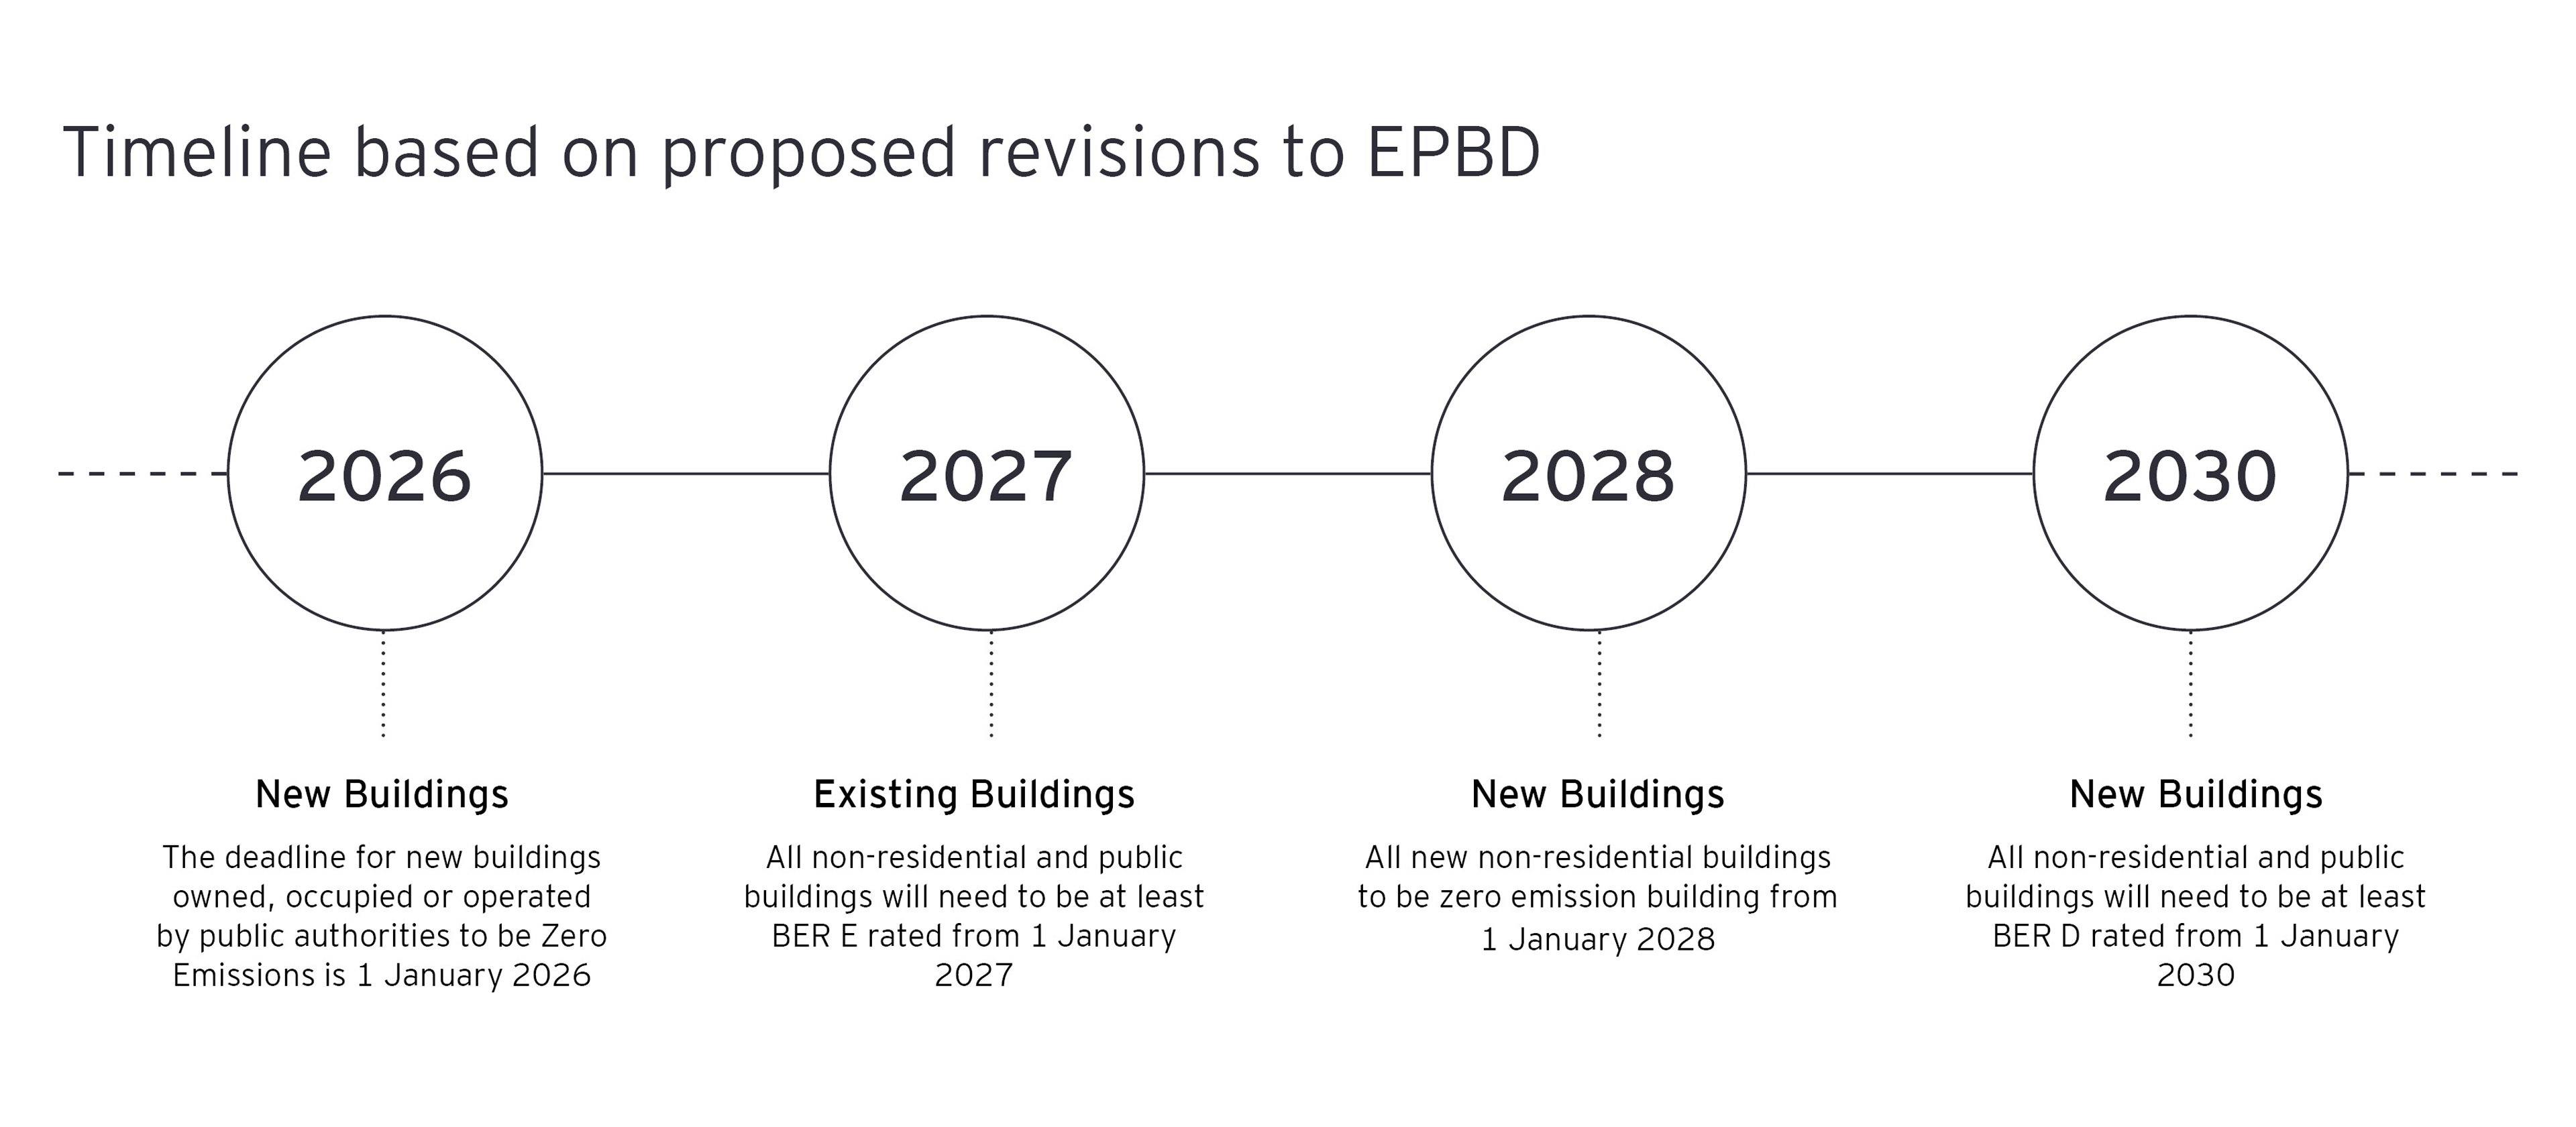 Timeline based on proposed revisions to EPBD